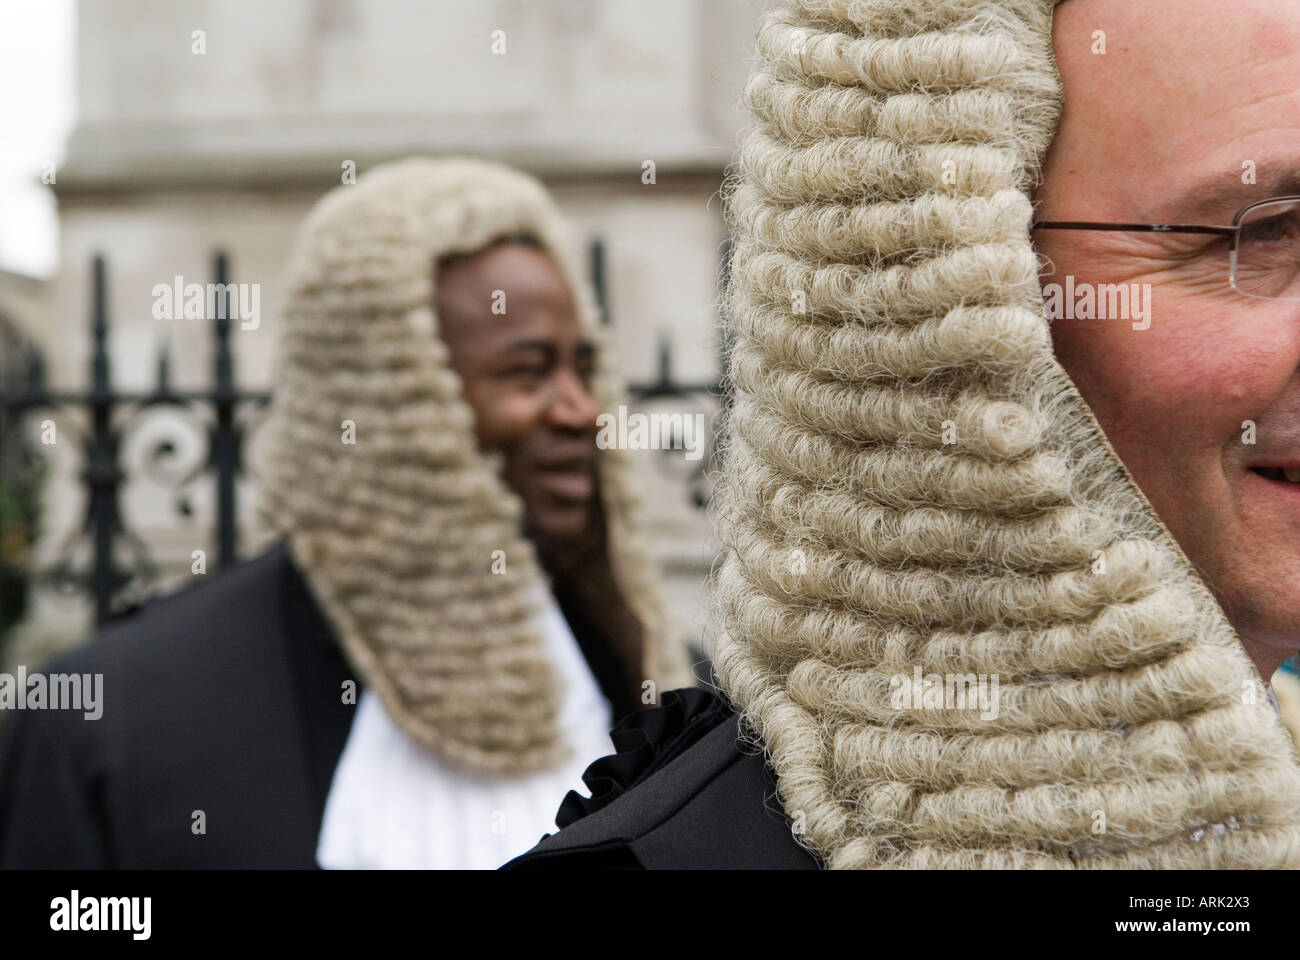 Black British District Court Judge in wig and gown at the Lord Chancellors Breakfast, for the start of the new Legal Year. London England HOMER SYKES Stock Photo